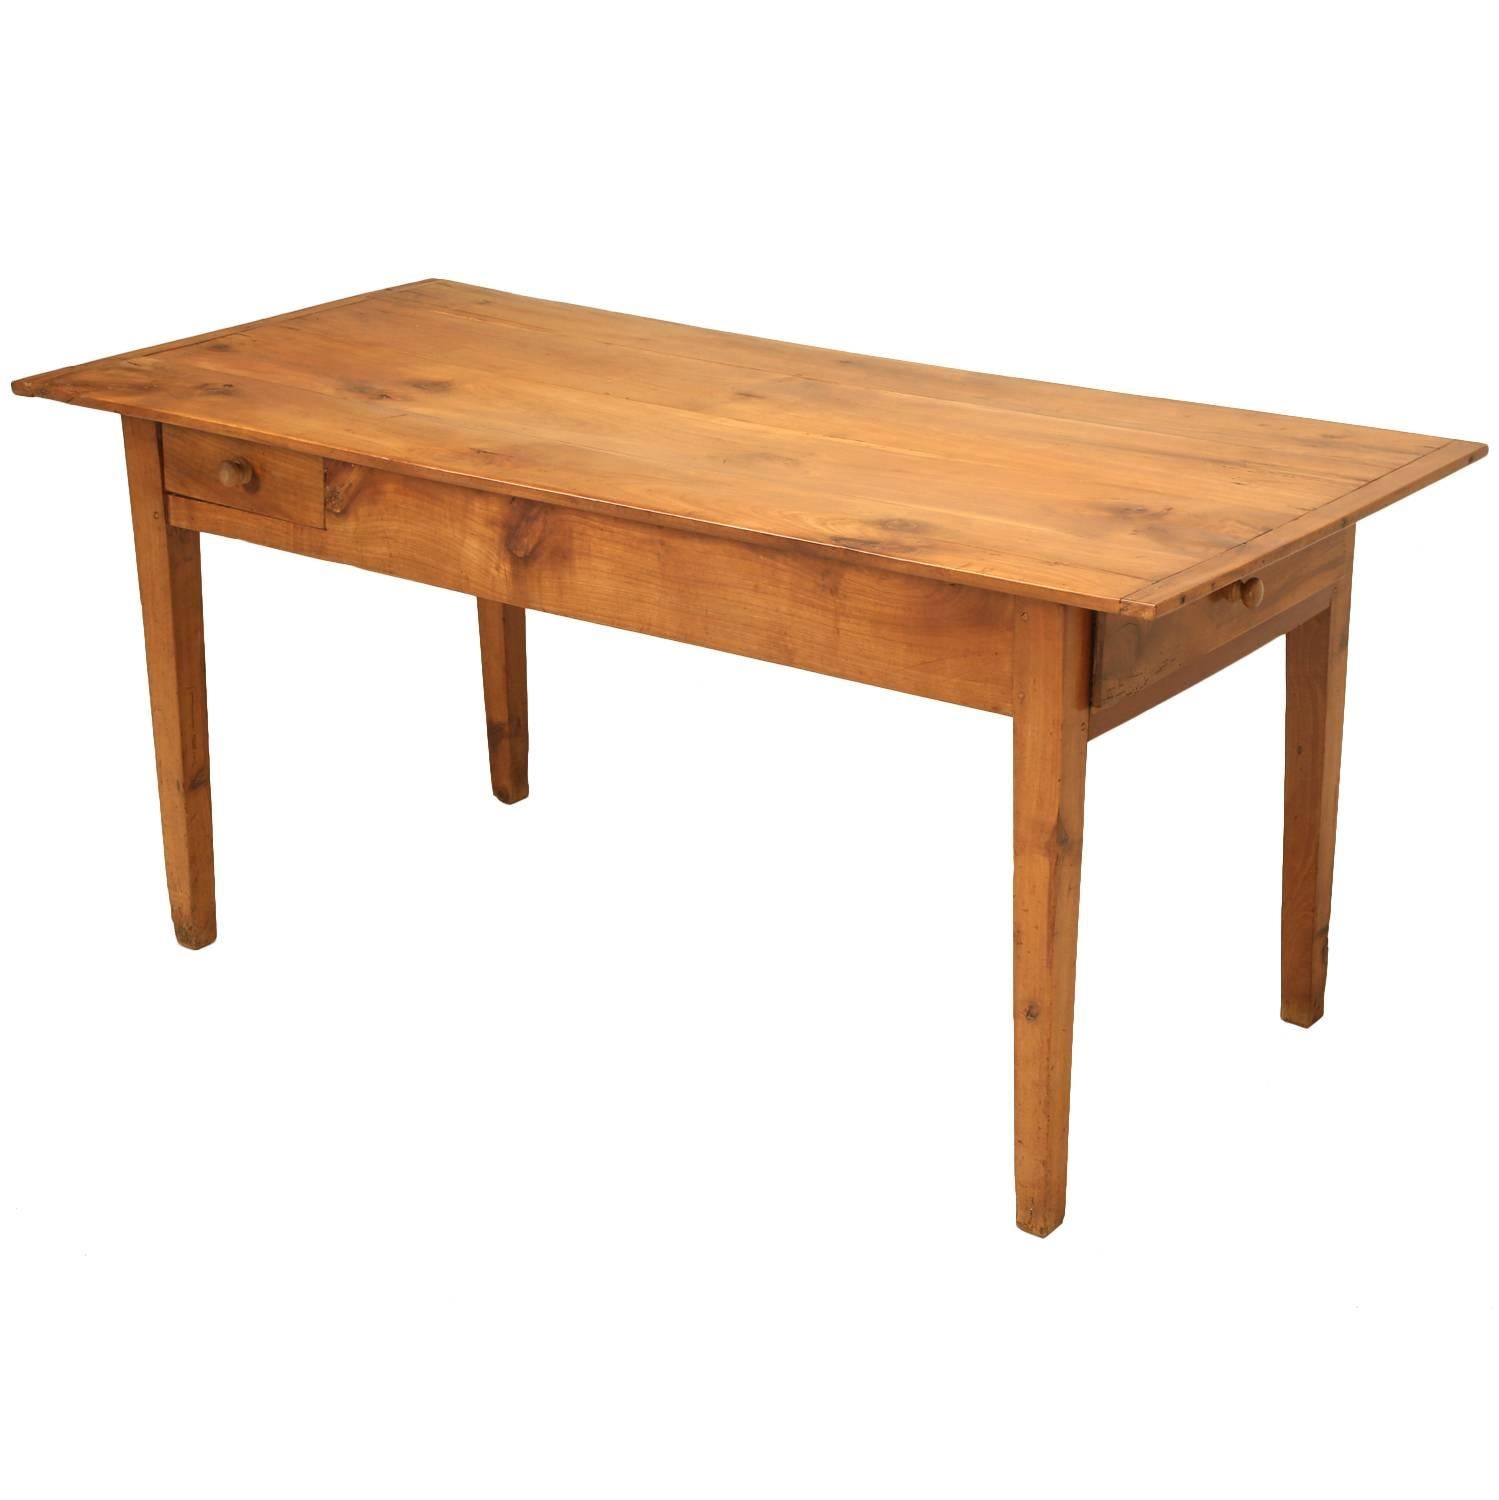 Antique Country French Farm Table or Kitchen Table in Cherry Wood c1880-1900